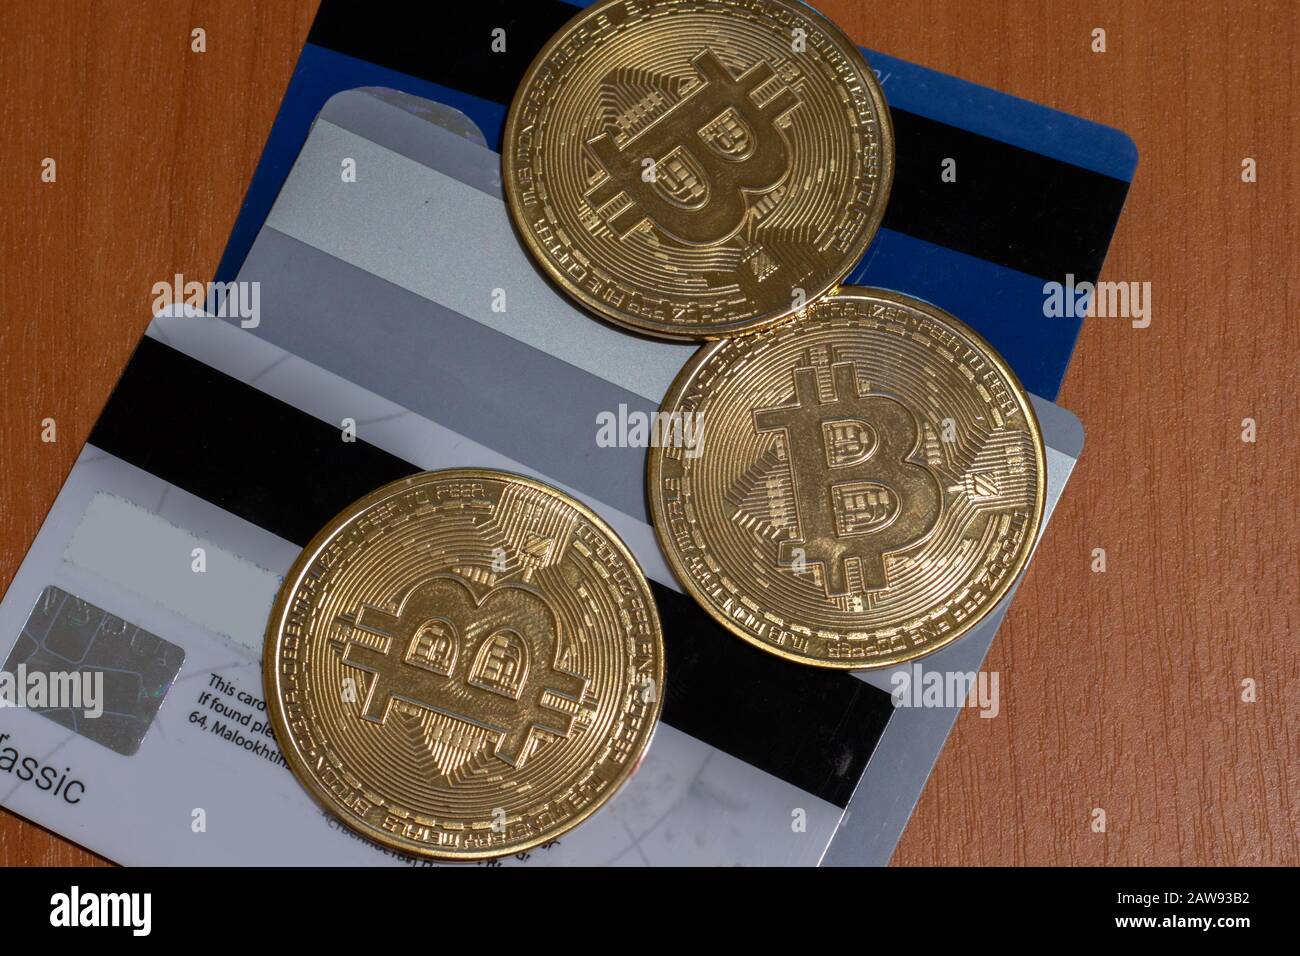 BTC bitcoin cryptocurrency with credit card top view Stock Photo